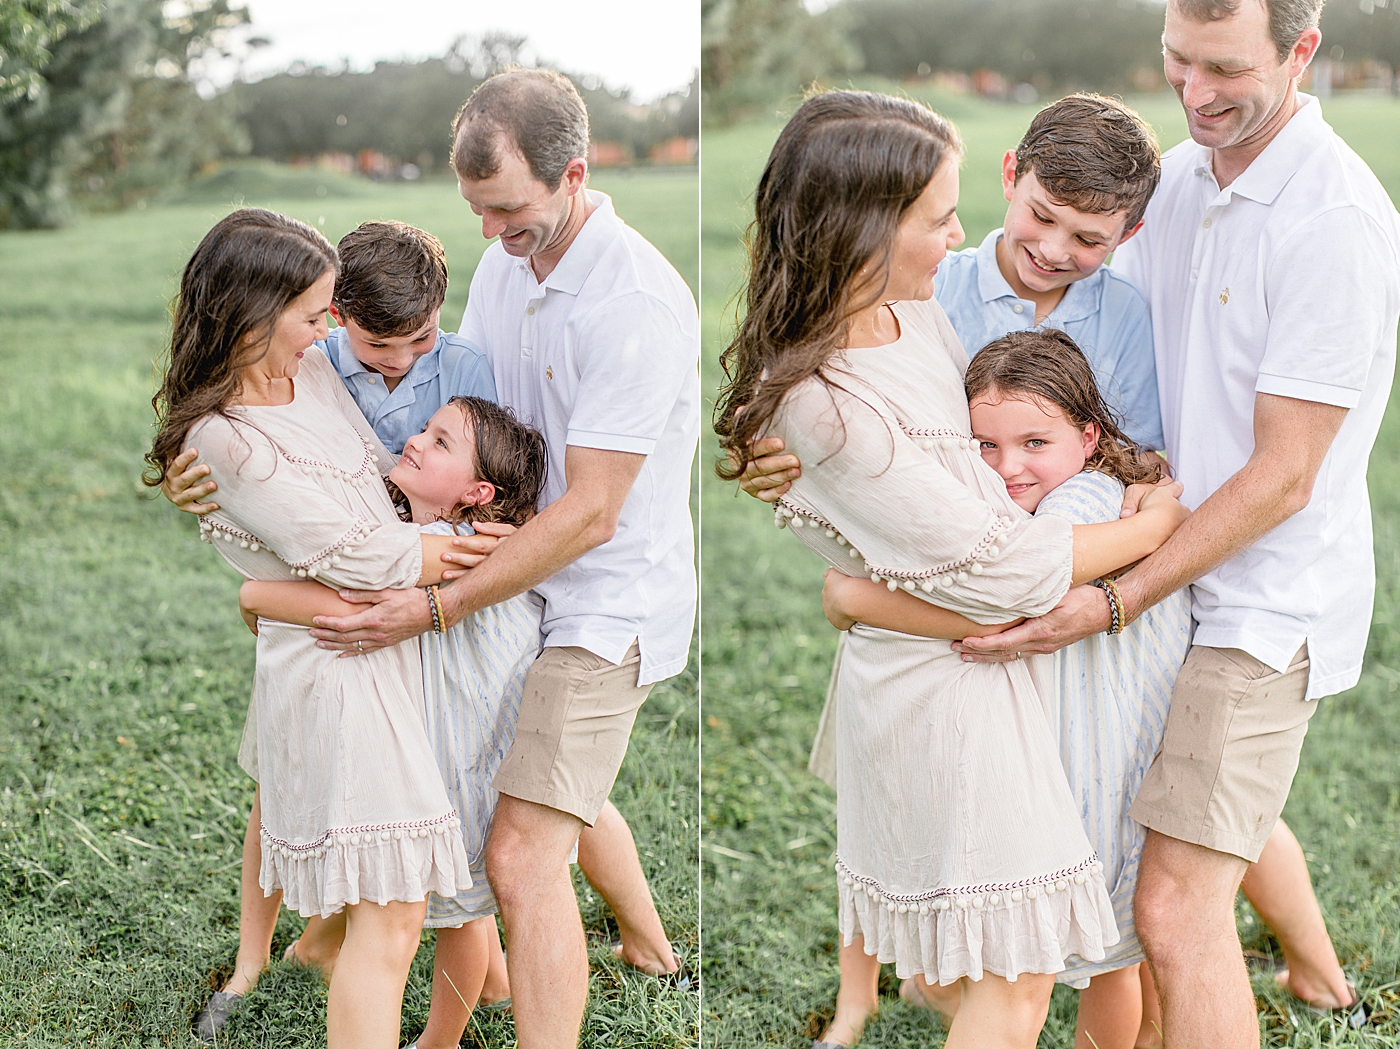 Family hug during photoshoot with rain. Photo by Brittany Elise Photography.